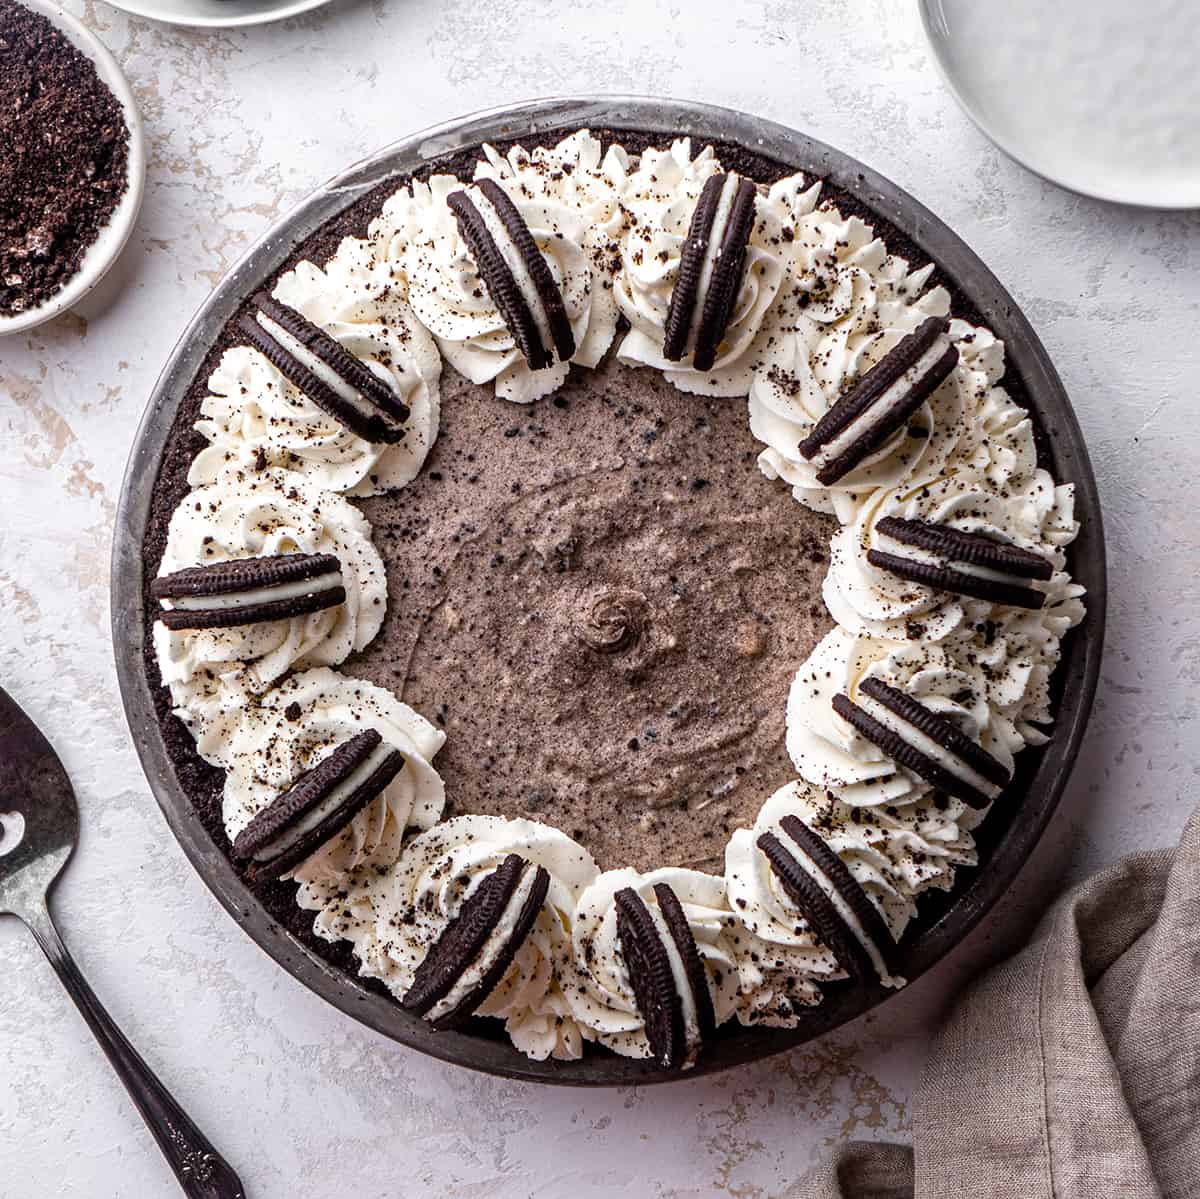 Overhead view of a decorated Oreo pie in a pie dish